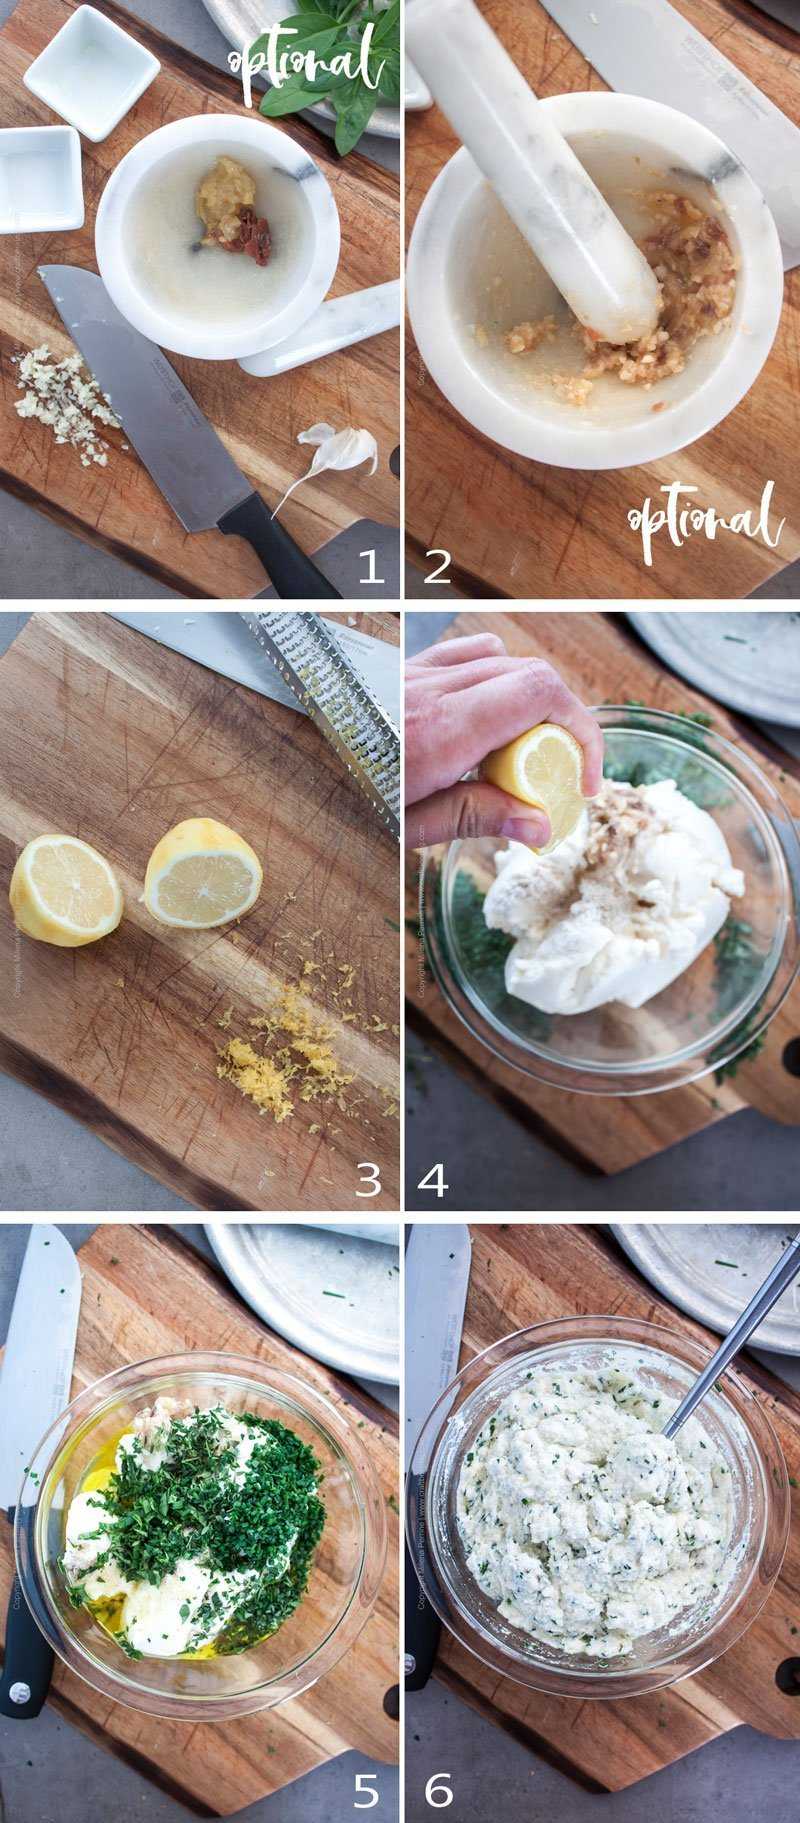 Step by step image grid showing how to make ricotta dip.